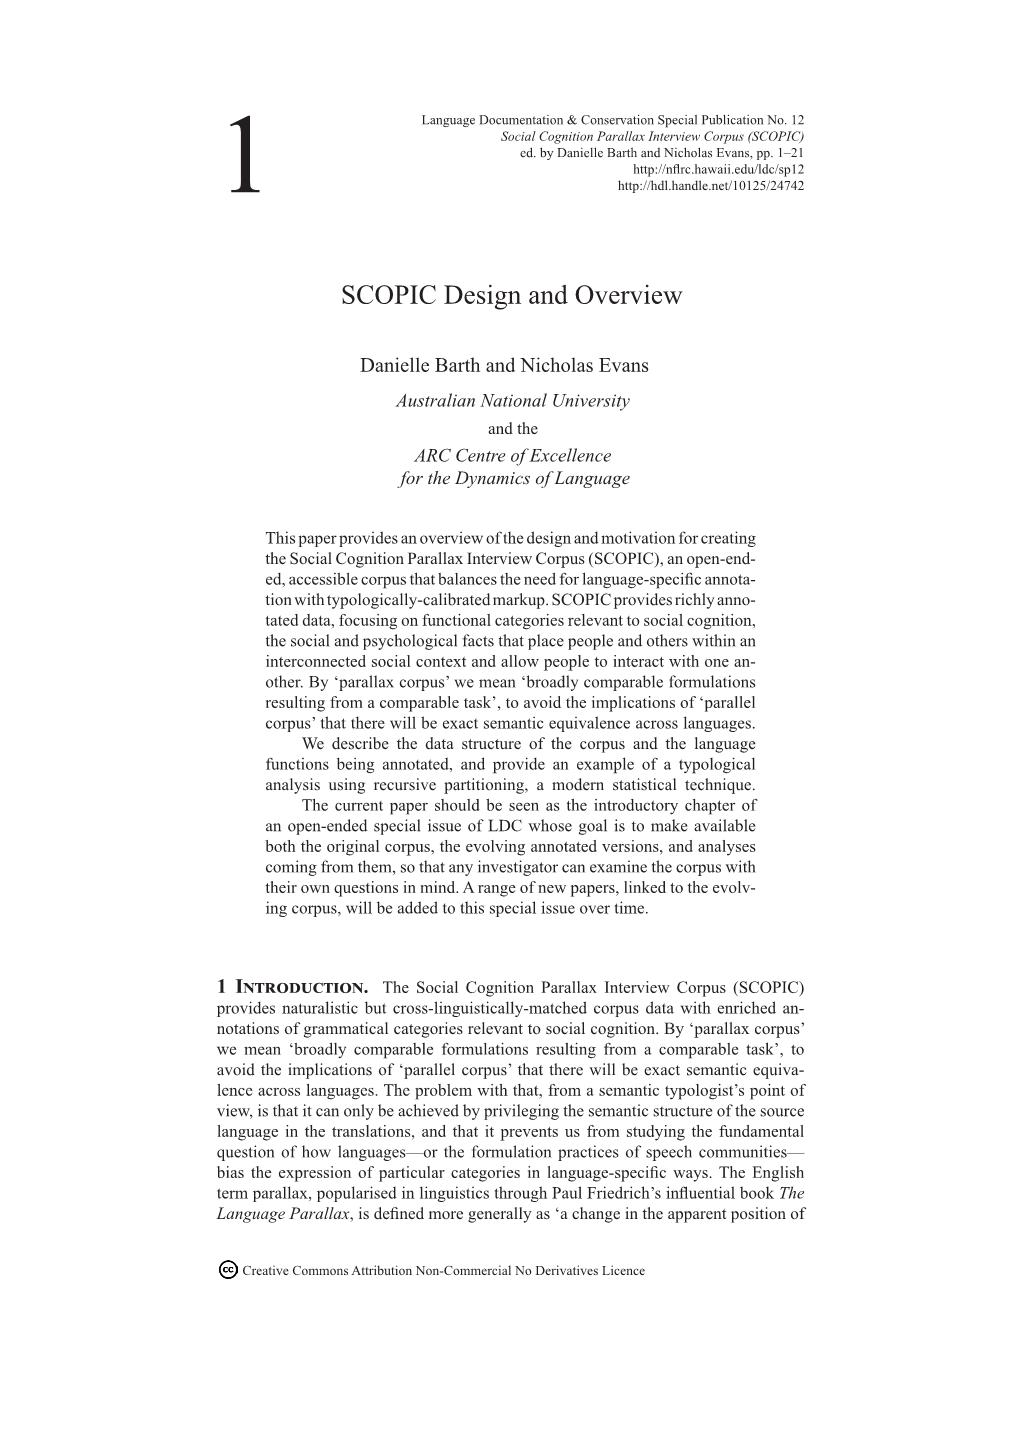 SCOPIC Design and Overview